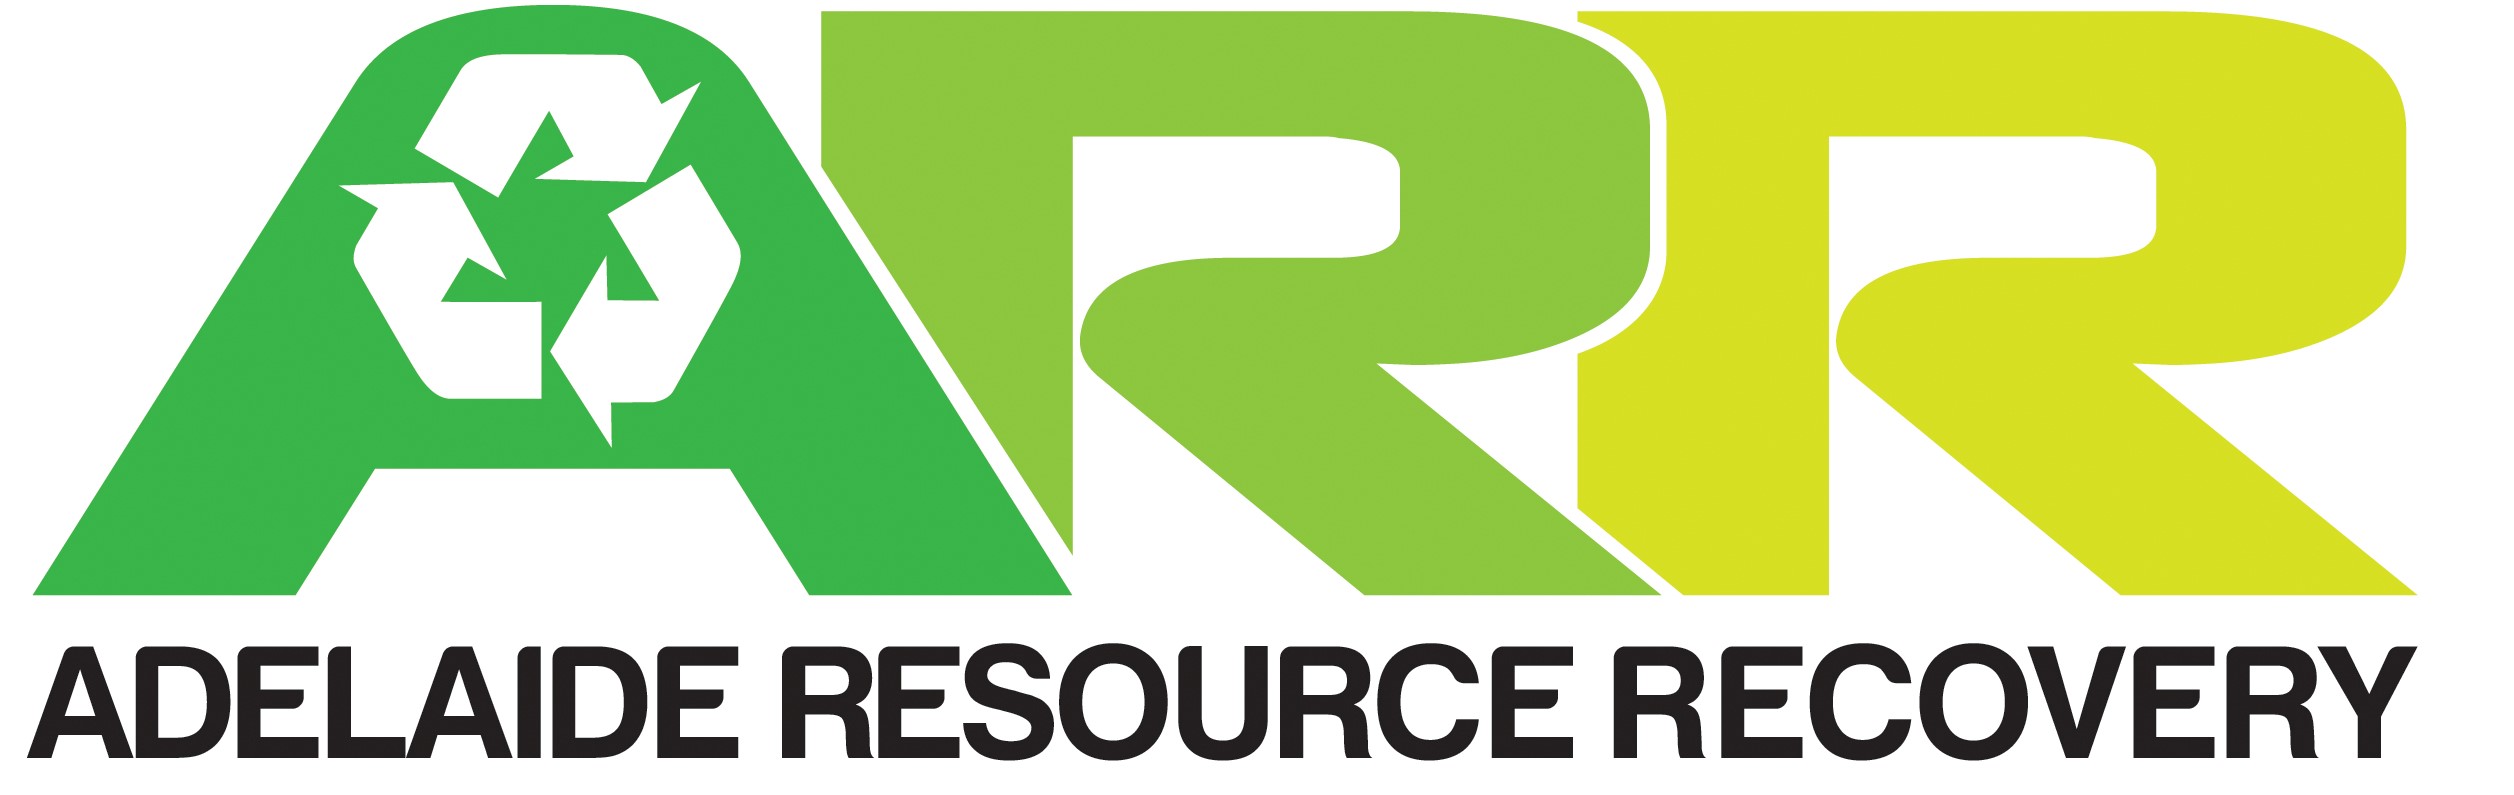 Adelaide Resource Recovery icon